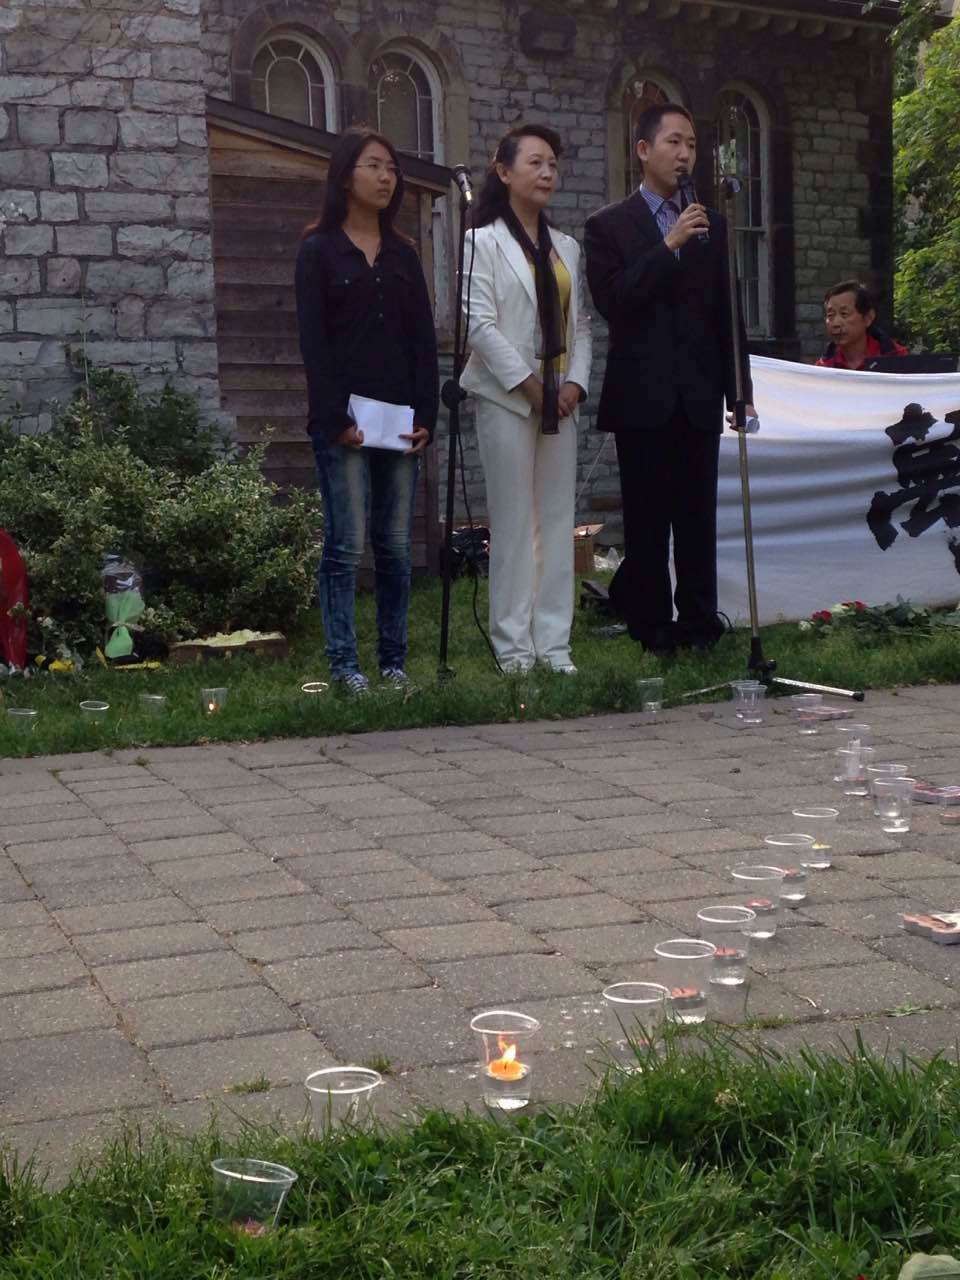 16 years old Dong Xuerui, daughter of polical prisoner Dong Guangping, and 21 years old Jiang Jiaji, son of political prisoner Li Bifeng, hosted the commemorial event with Ms Sheng Xue